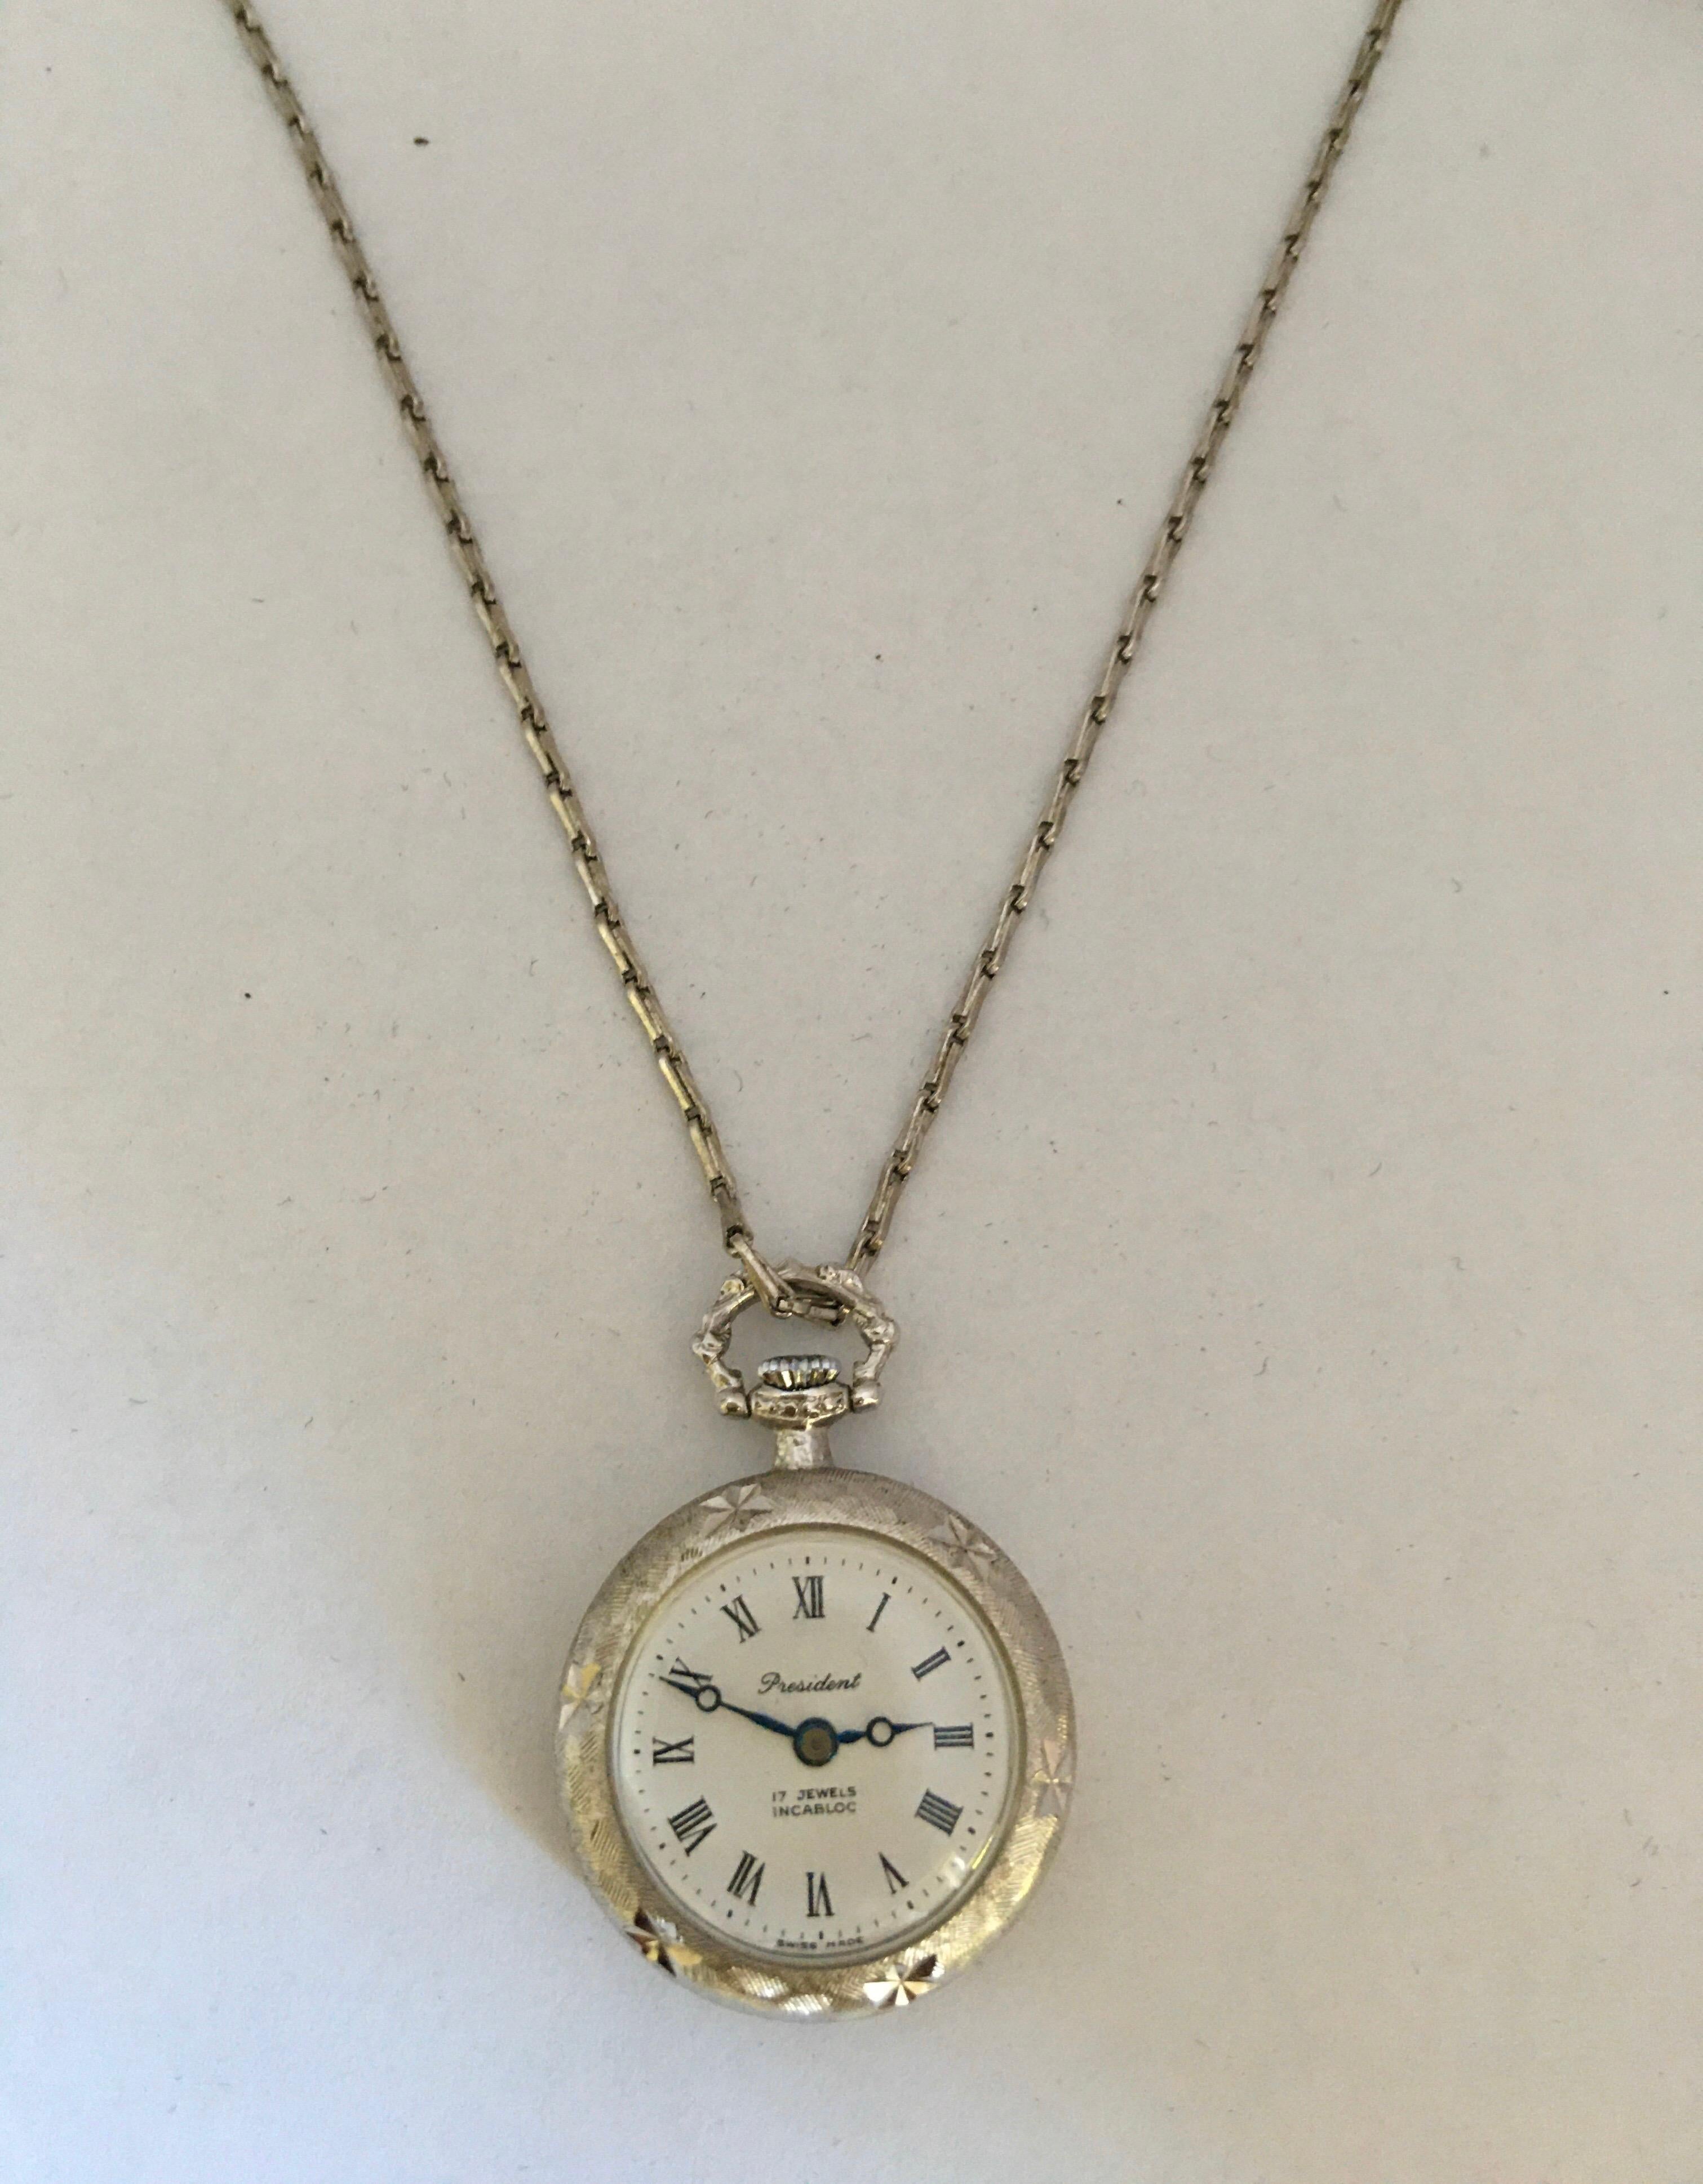 Vintage 1960s Hand-Winding Silver Plated Engraved Pendant Watch 5